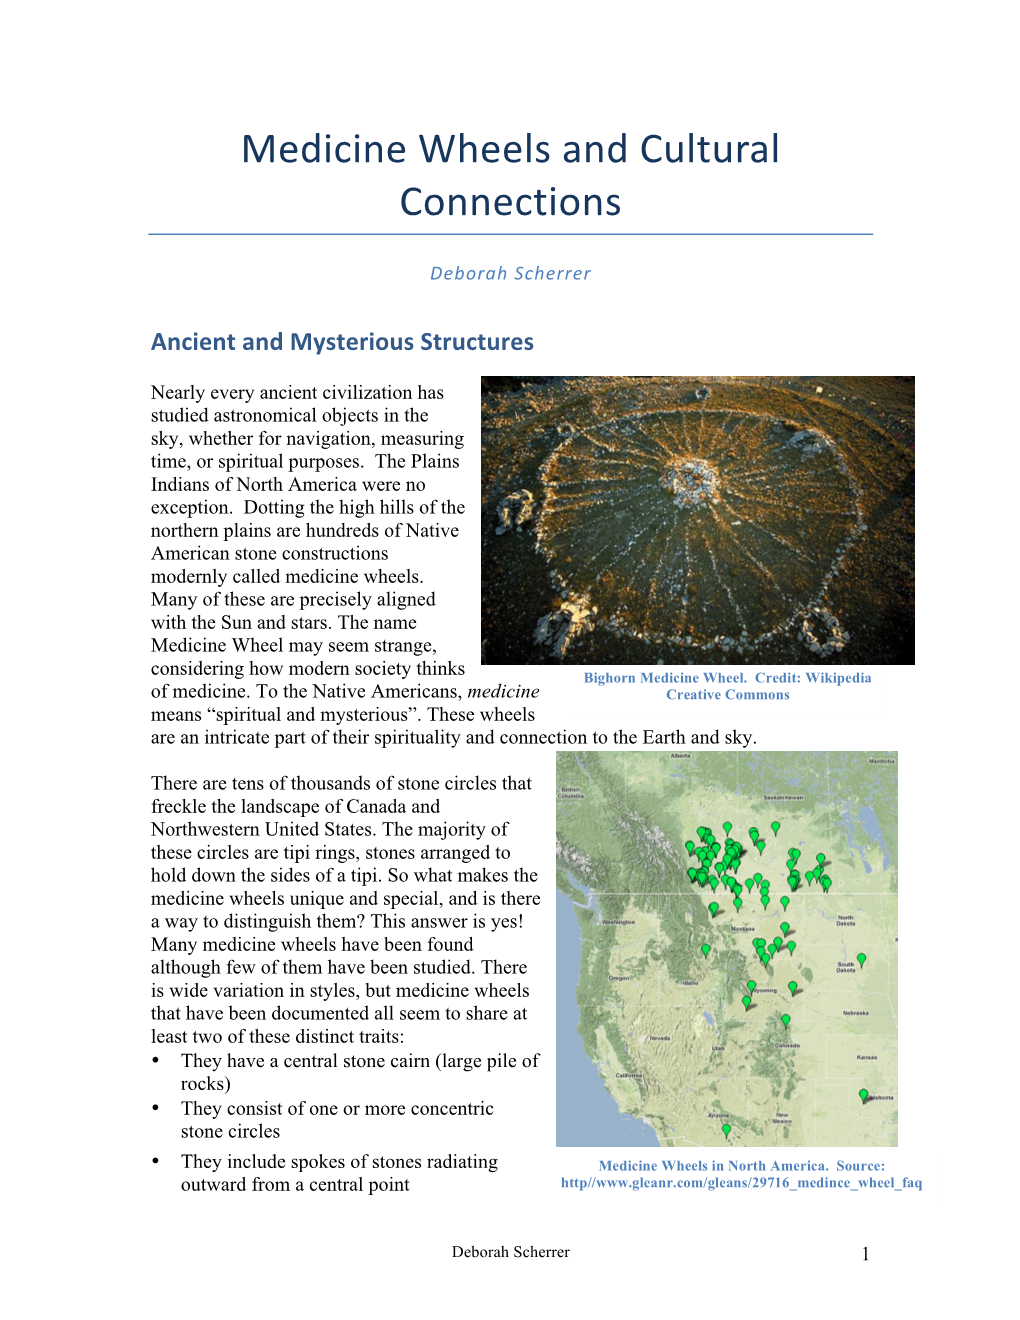 Medicine Wheels and Cultural Connections